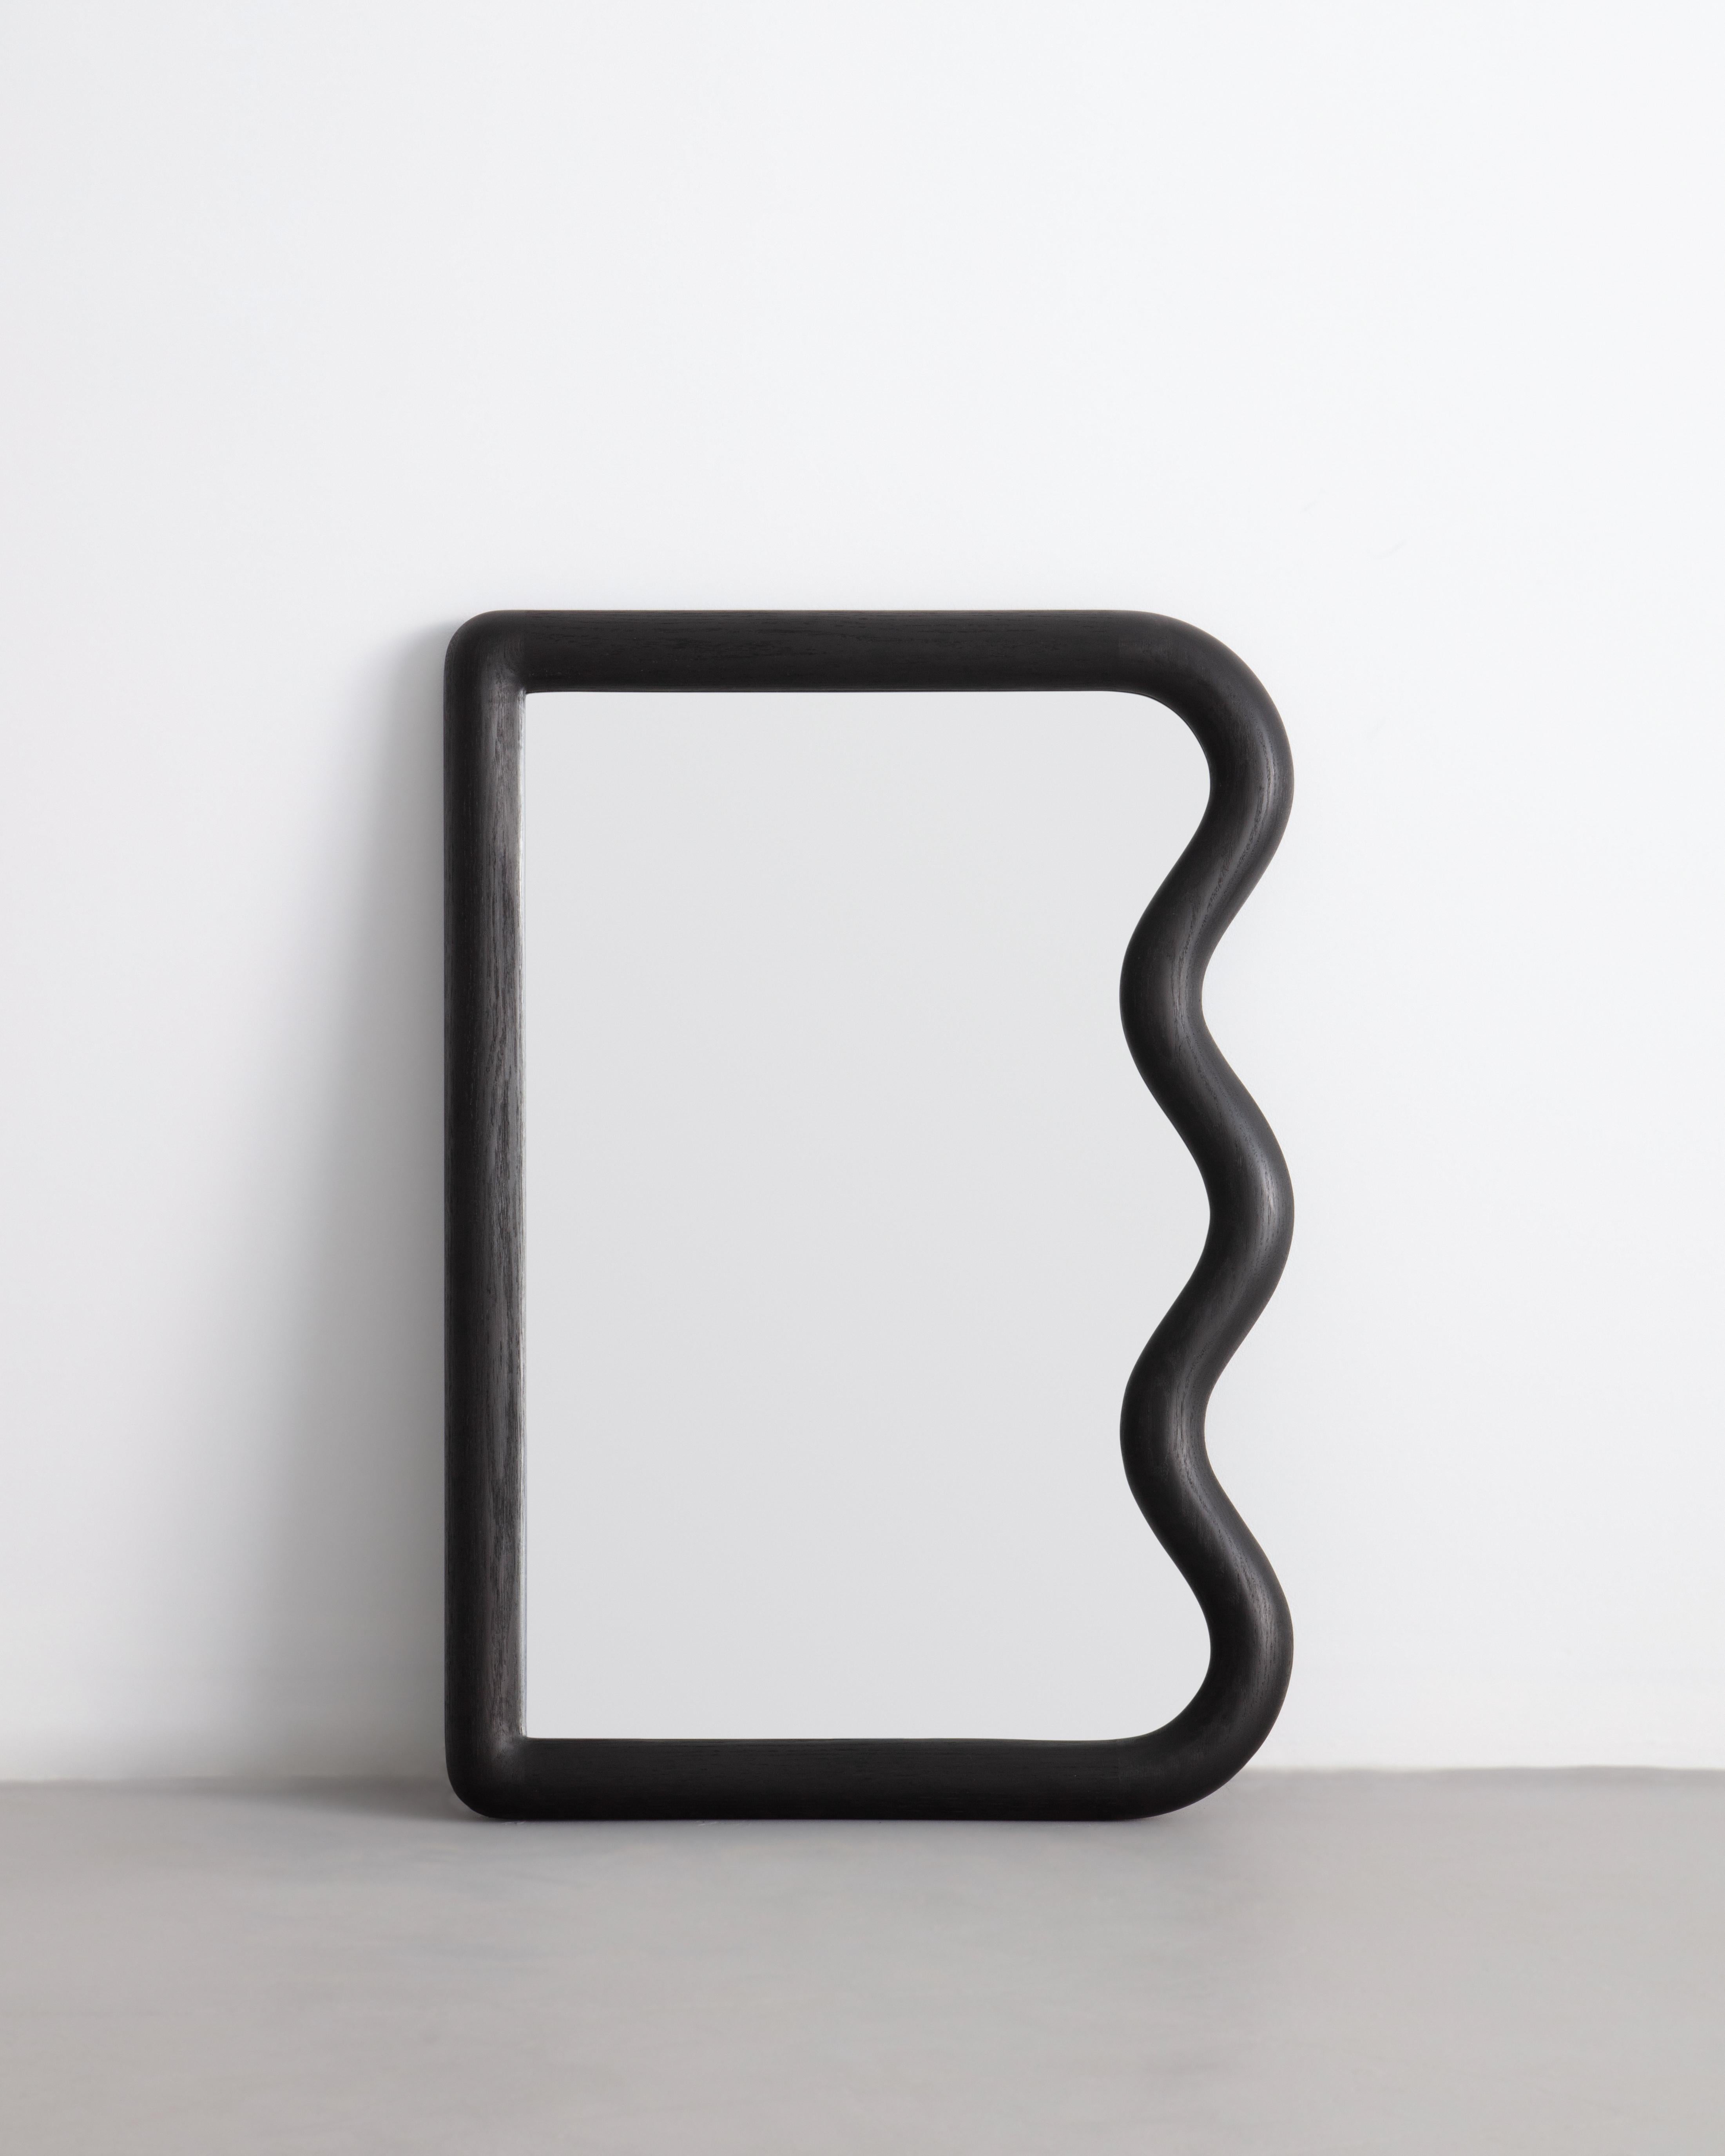 Constructed from solid charred oak this mini Squiggle mirror is made to order. The mirror can be hung vertically by its custom french cleat.

Mirror can be placed leaning or hung.